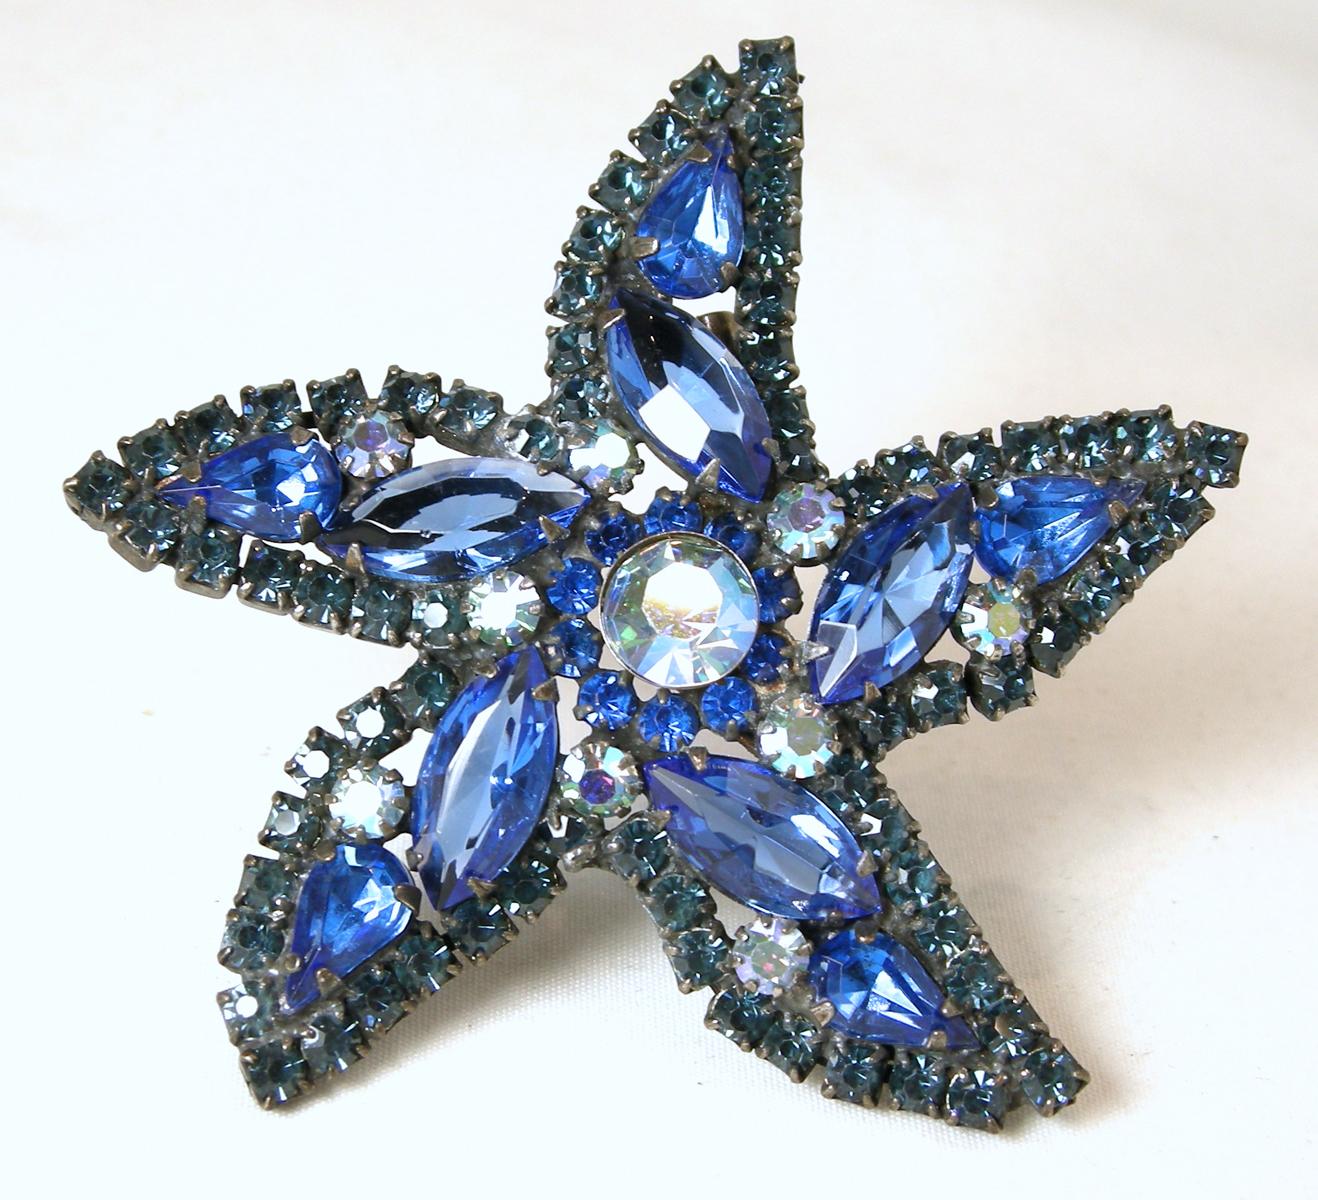 These is a vintage signed Weiss set.  The brooch has a star design with blue crystals and aurora borealis in a silver tone setting.  The brooch measures 2-1/2” across/diameter.  The clip earrings are round and measure 1”.  In excellent condition,